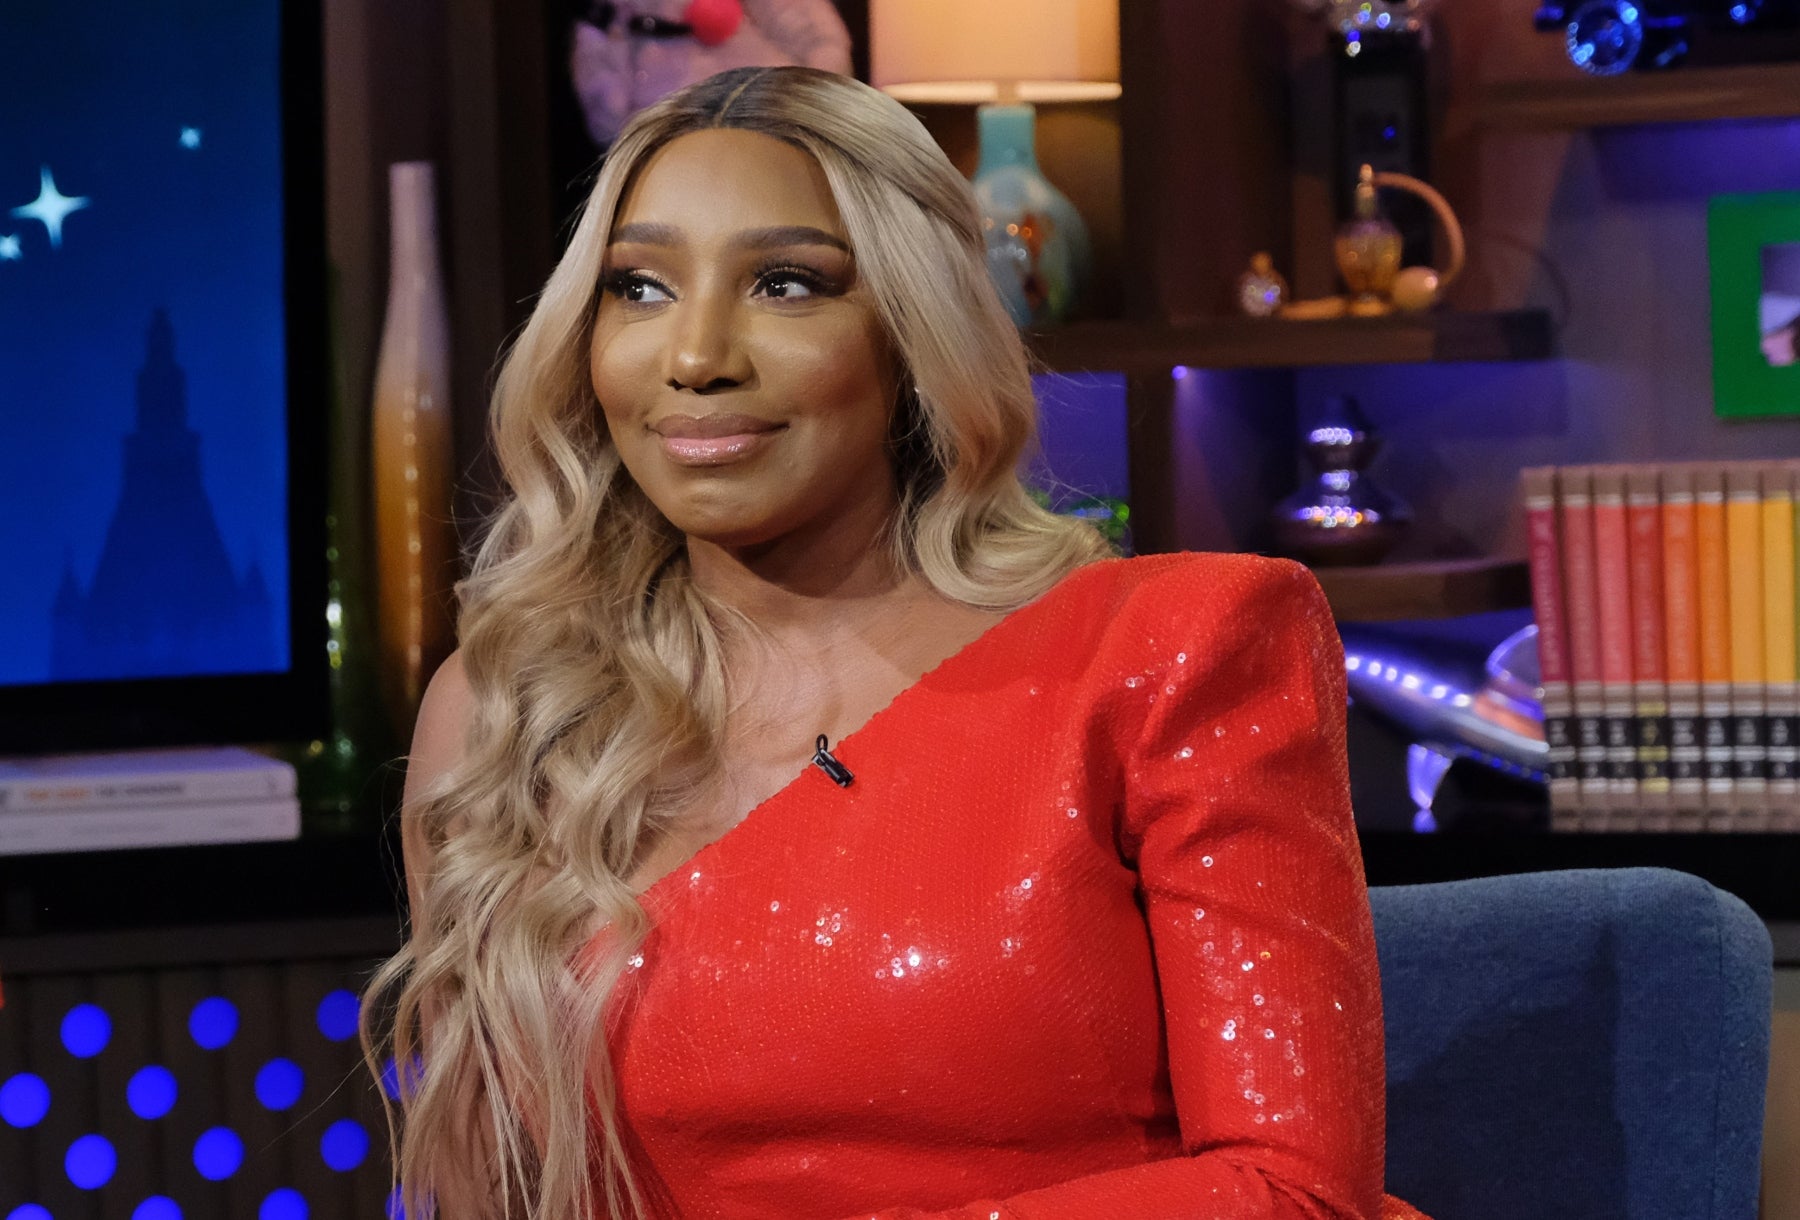 NeNe Leakes On Adjusting To ‘New Normal’ After Passing Of Husband Gregg: ‘I Have Good Days And Bad Days’